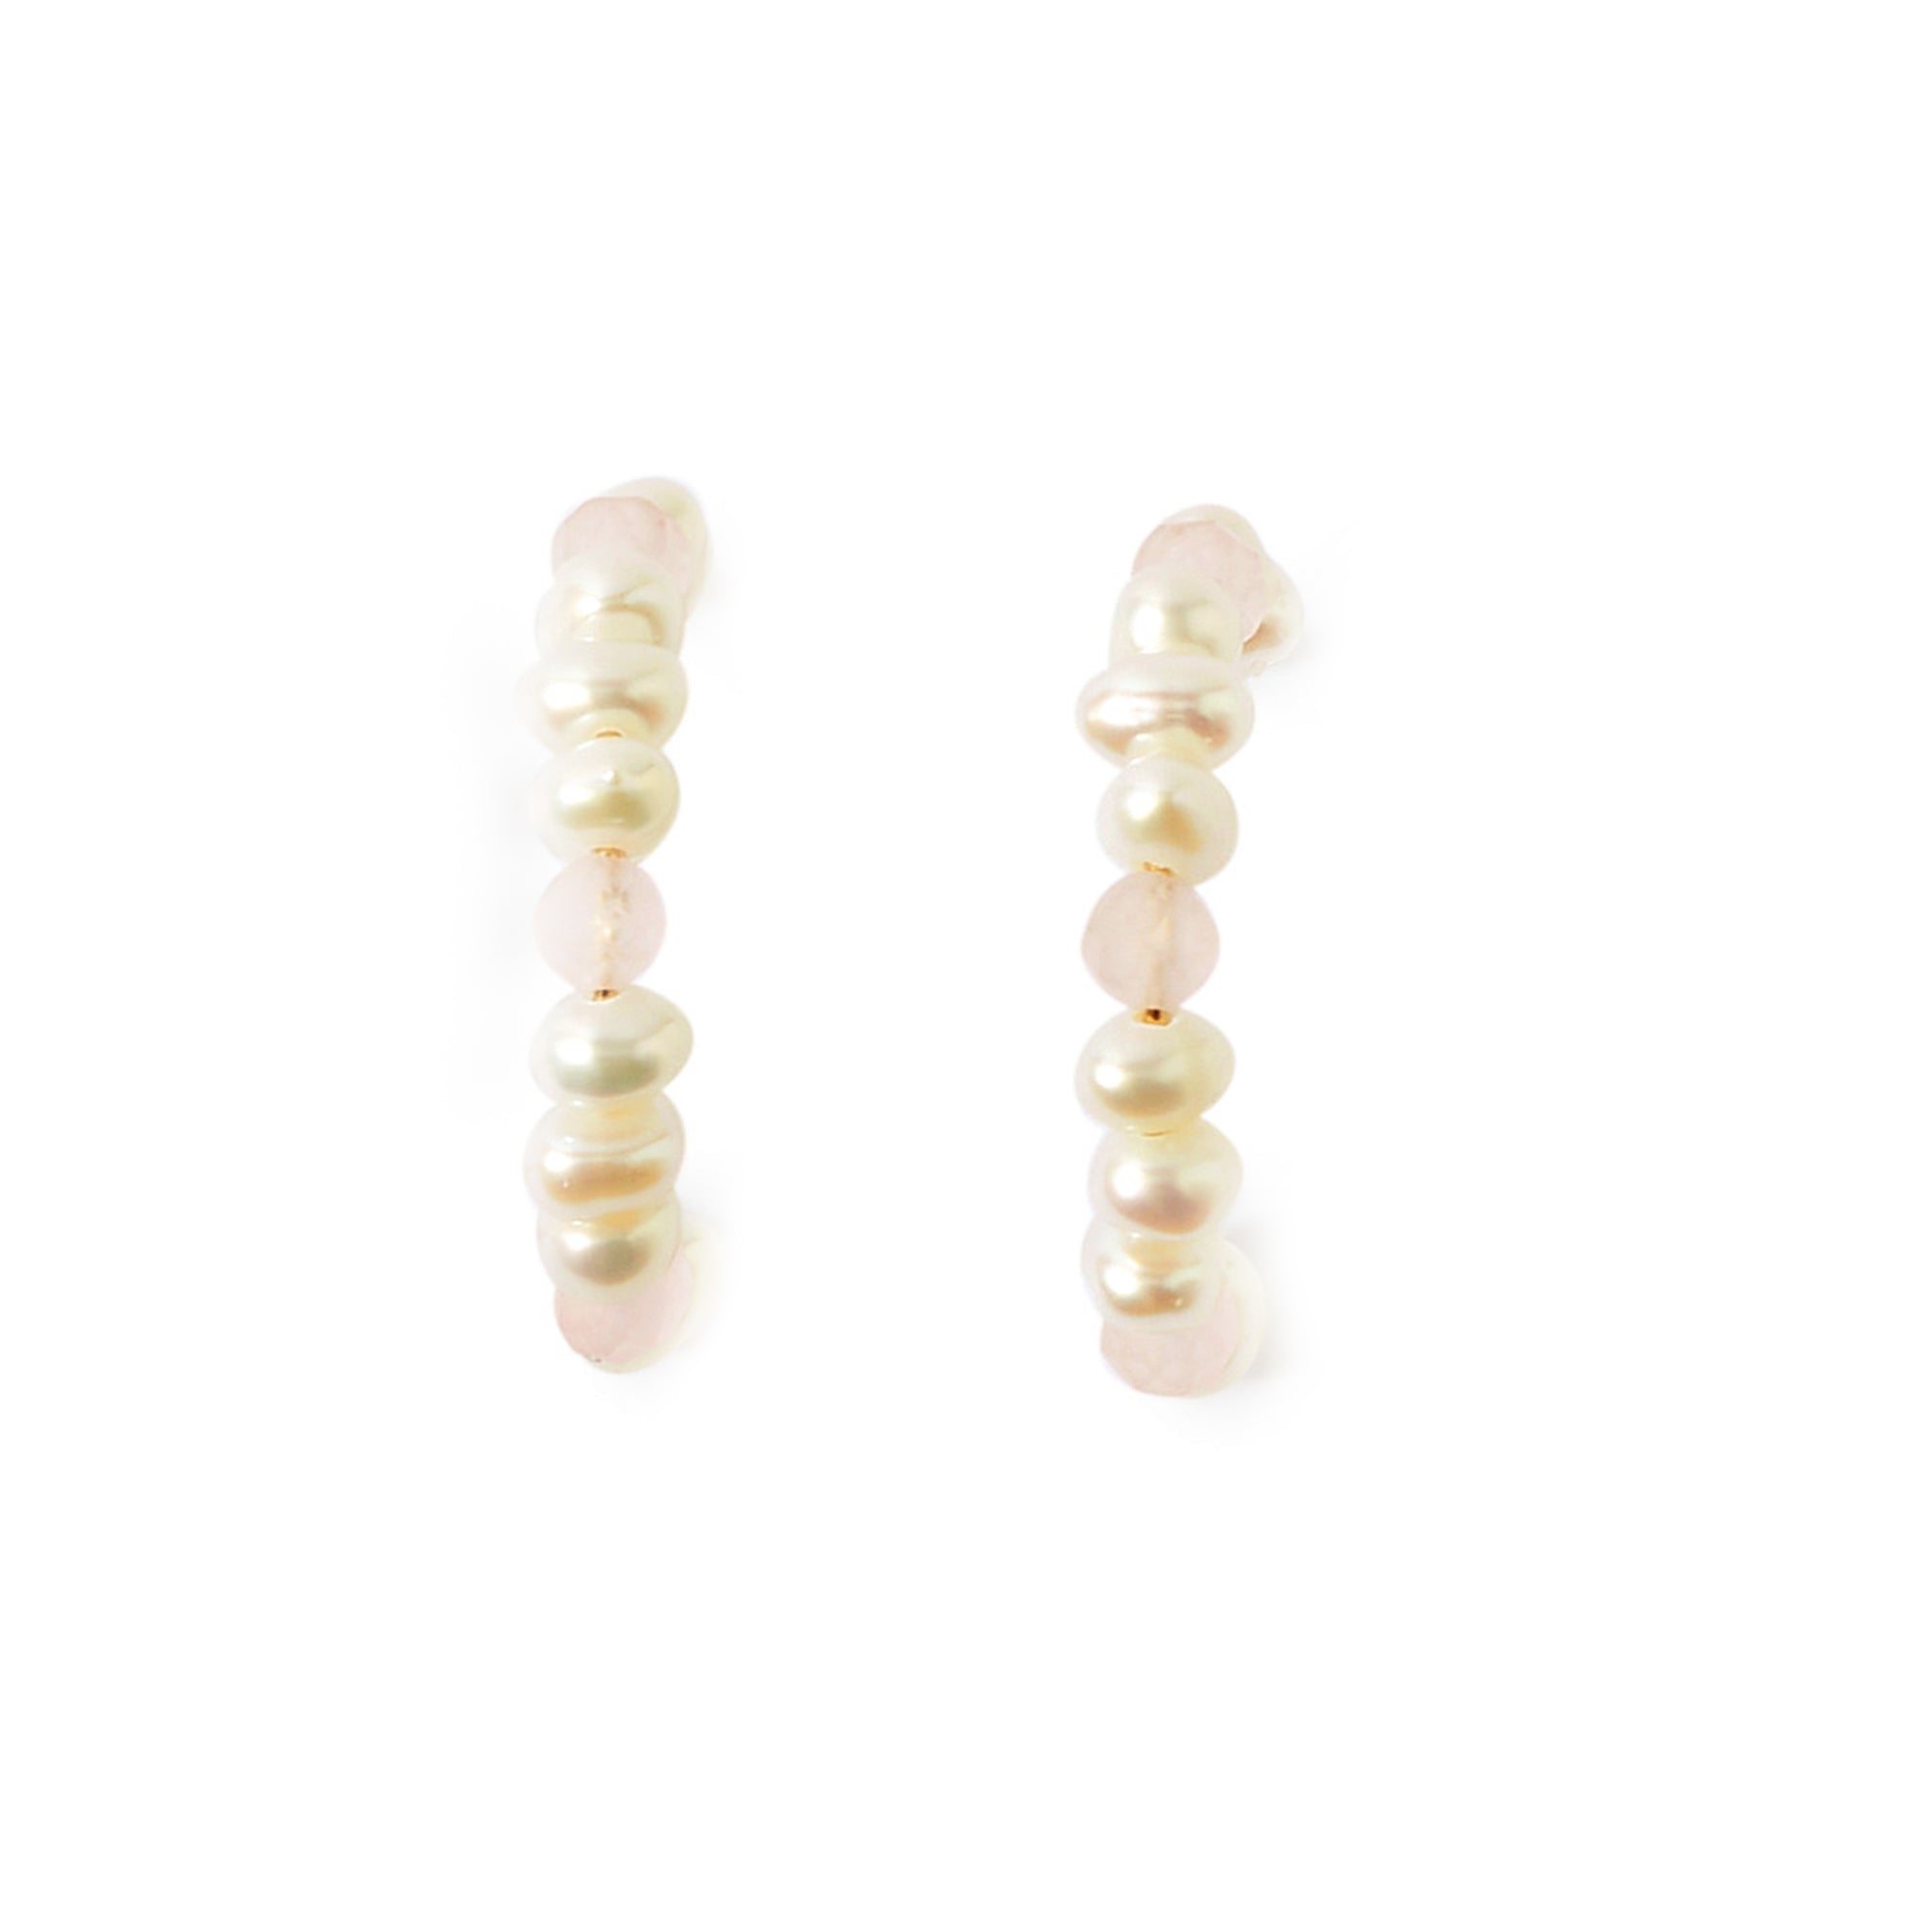 Real Gold Plated Pearl And Rose Quartz Hoop Earrings For Women By Accessorize London